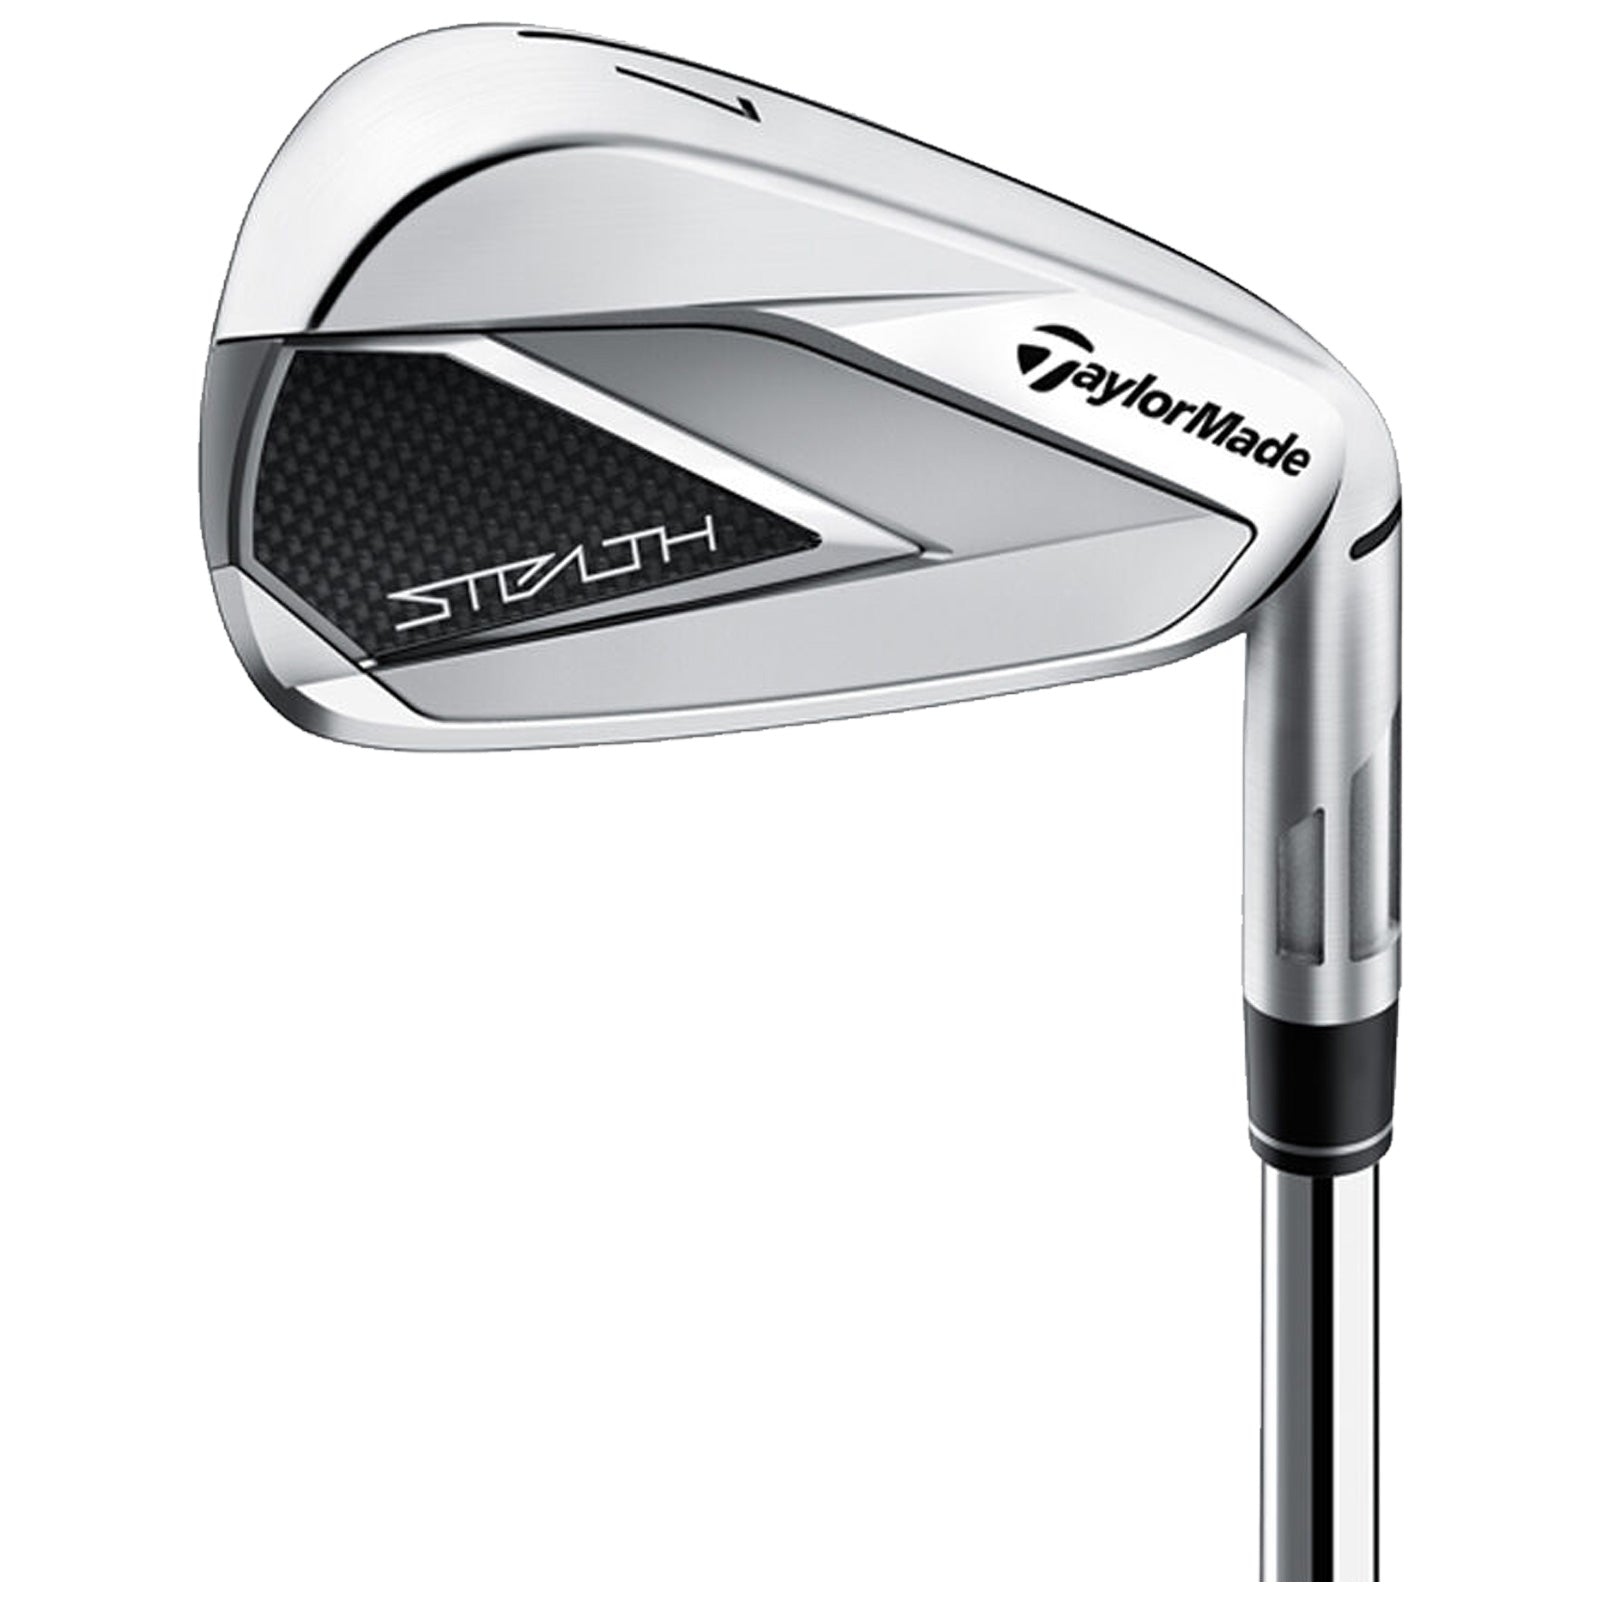 LEFT Handed TaylorMade Mens Stealth Iron Set